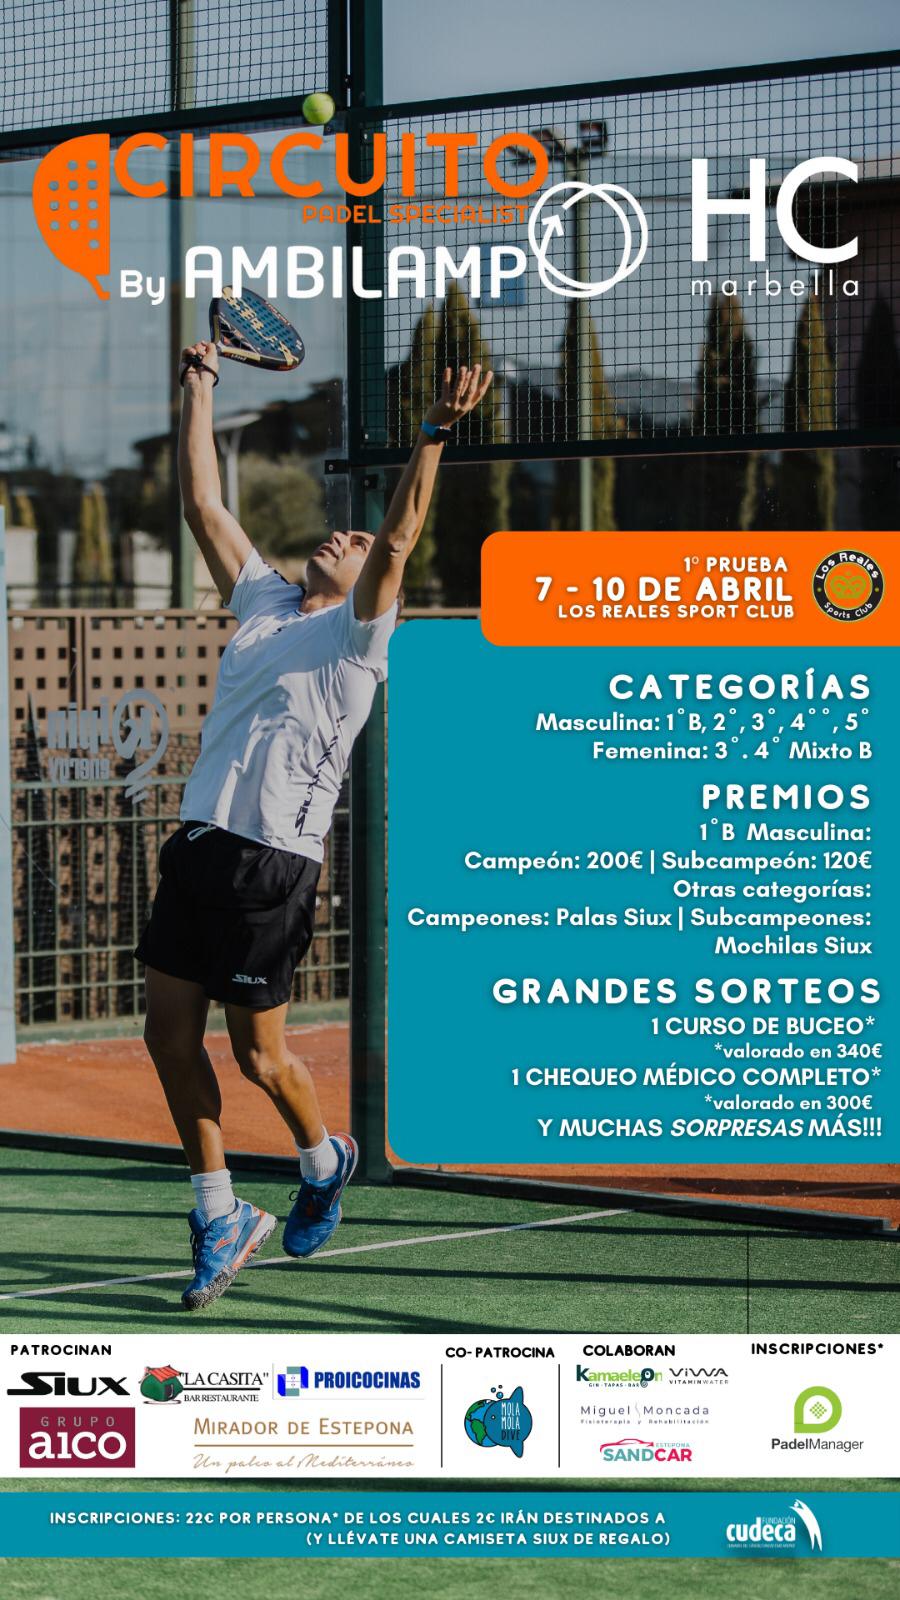 I Padel Specialist by AMBILAMP Padel Tour in benefit of Cudeca